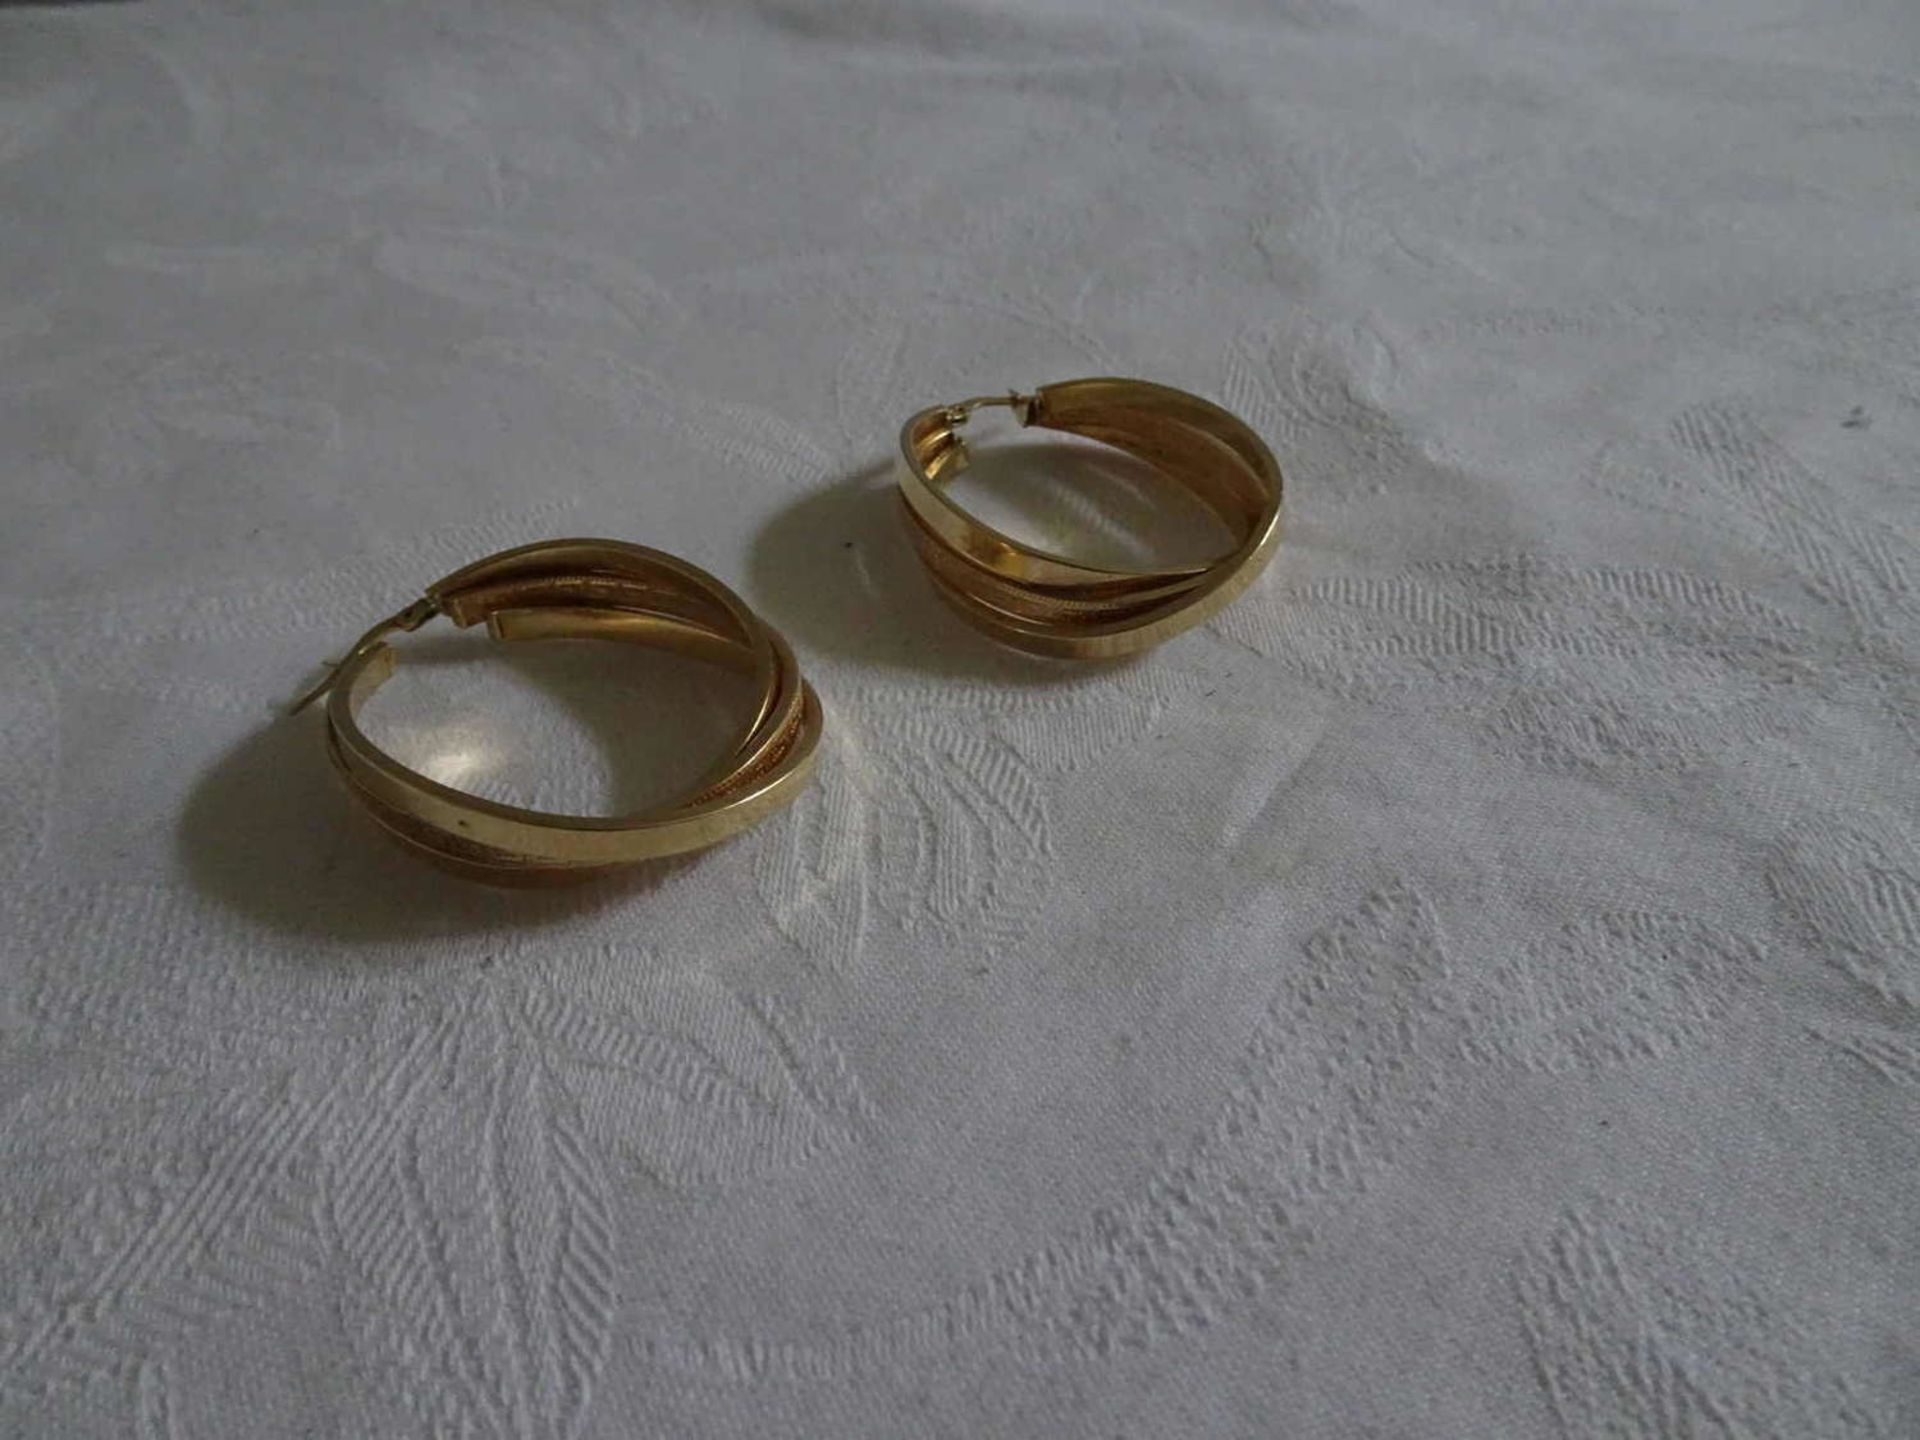 1 pair of hoop earrings, 585er yellow gold, weight about 6.4 gr.